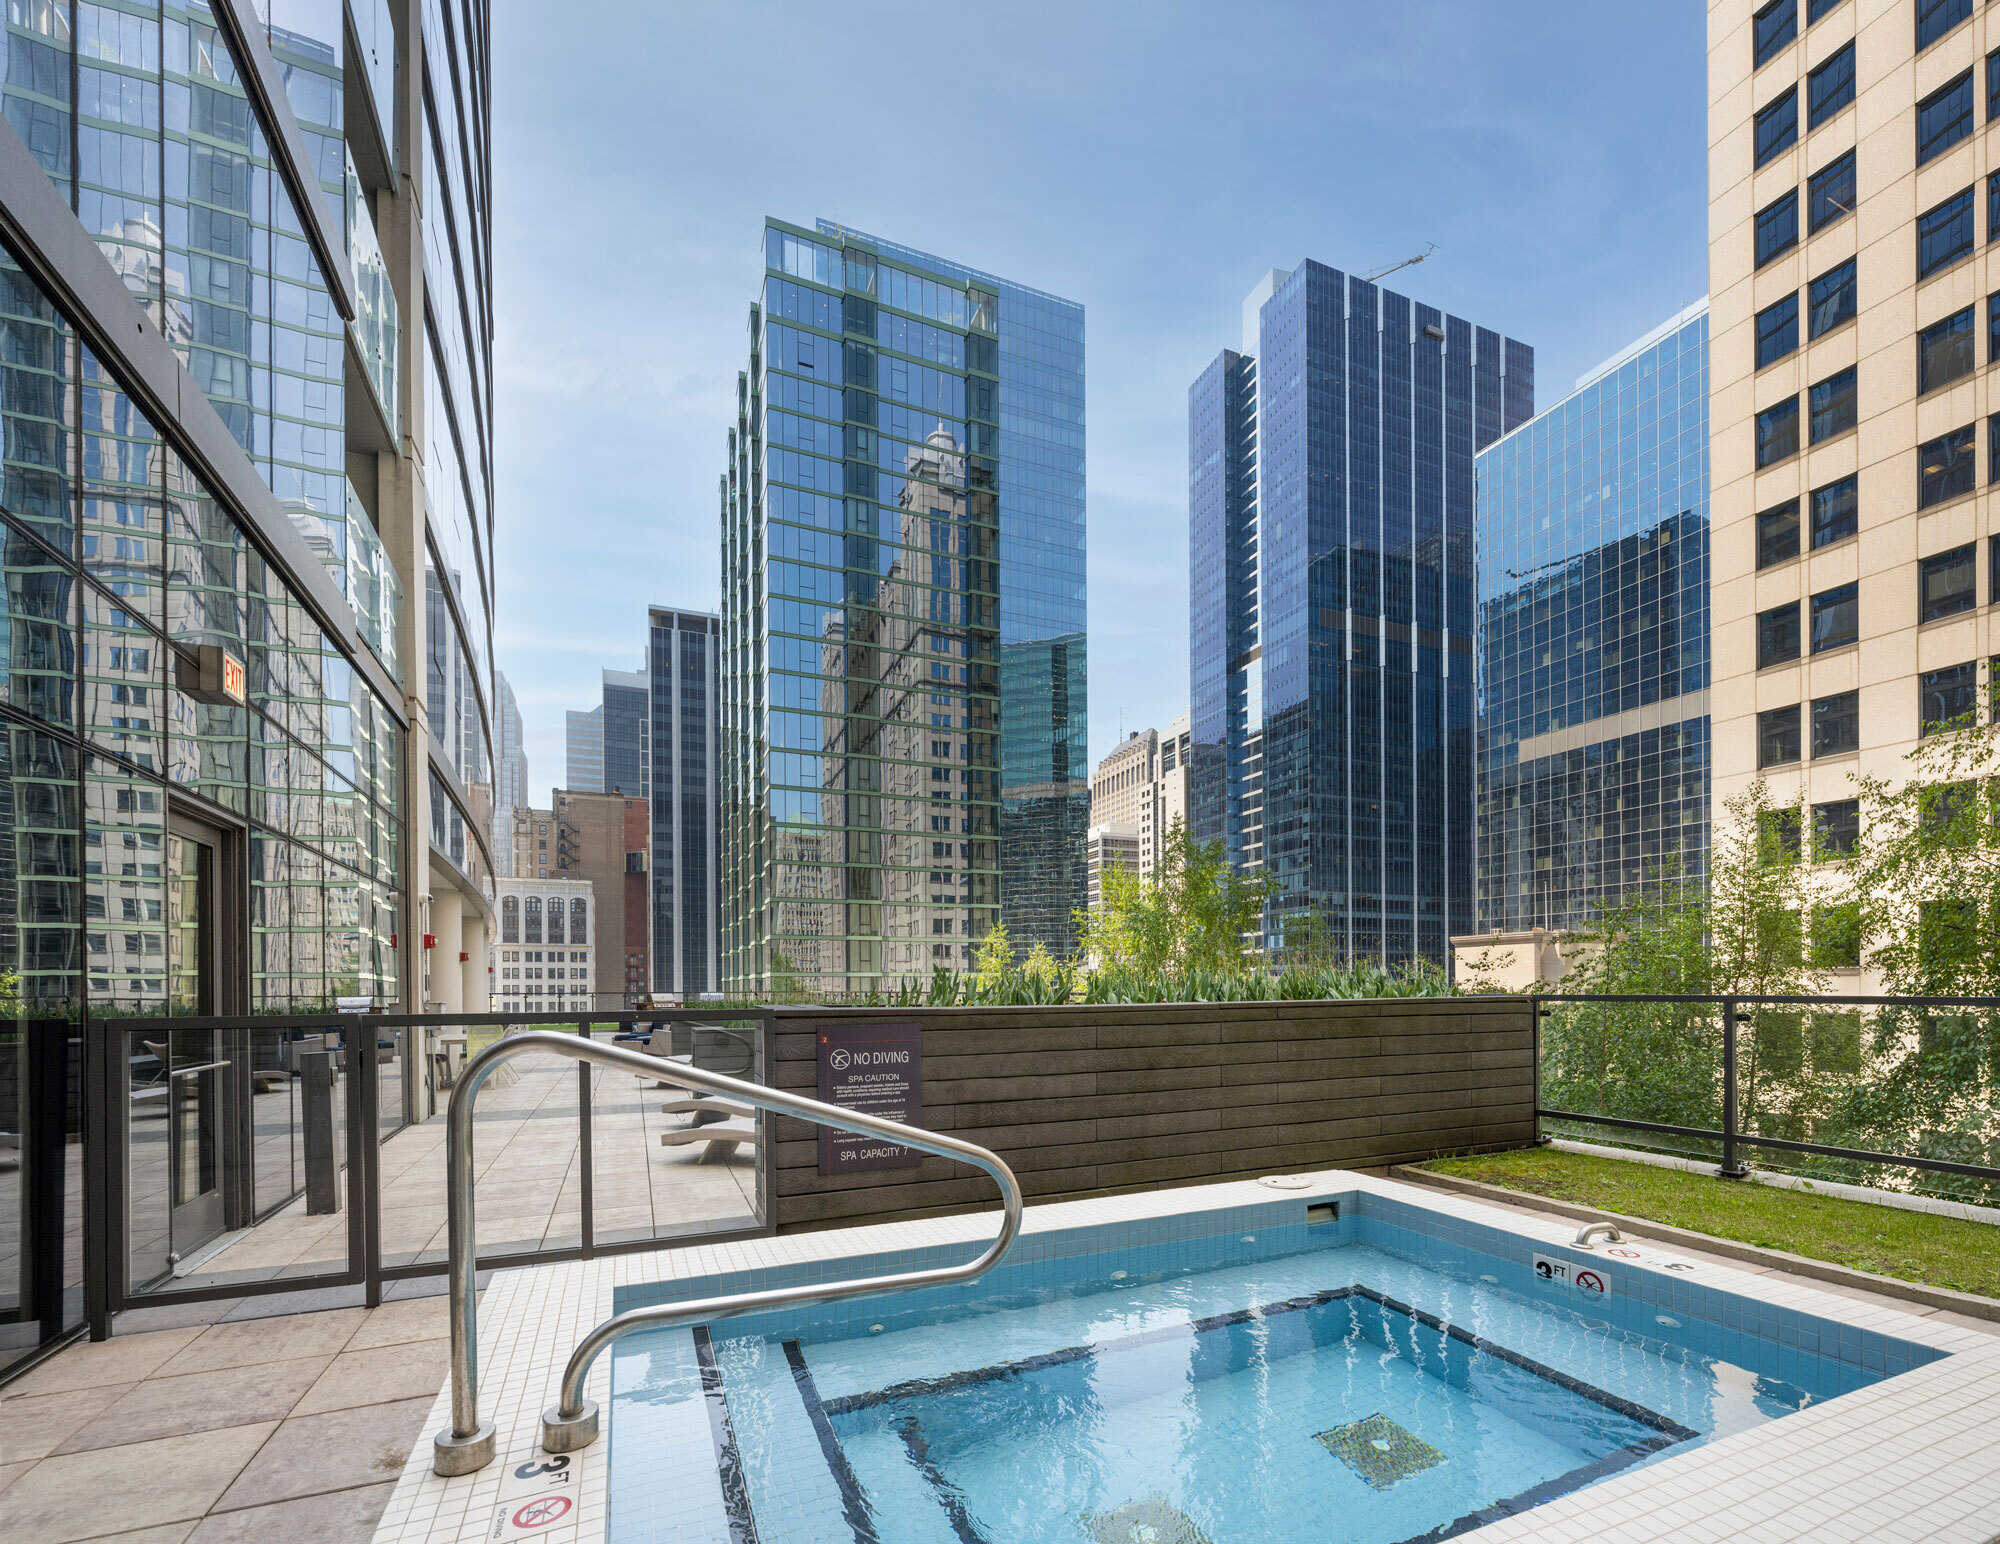 outdoor hot tub with view of buildings